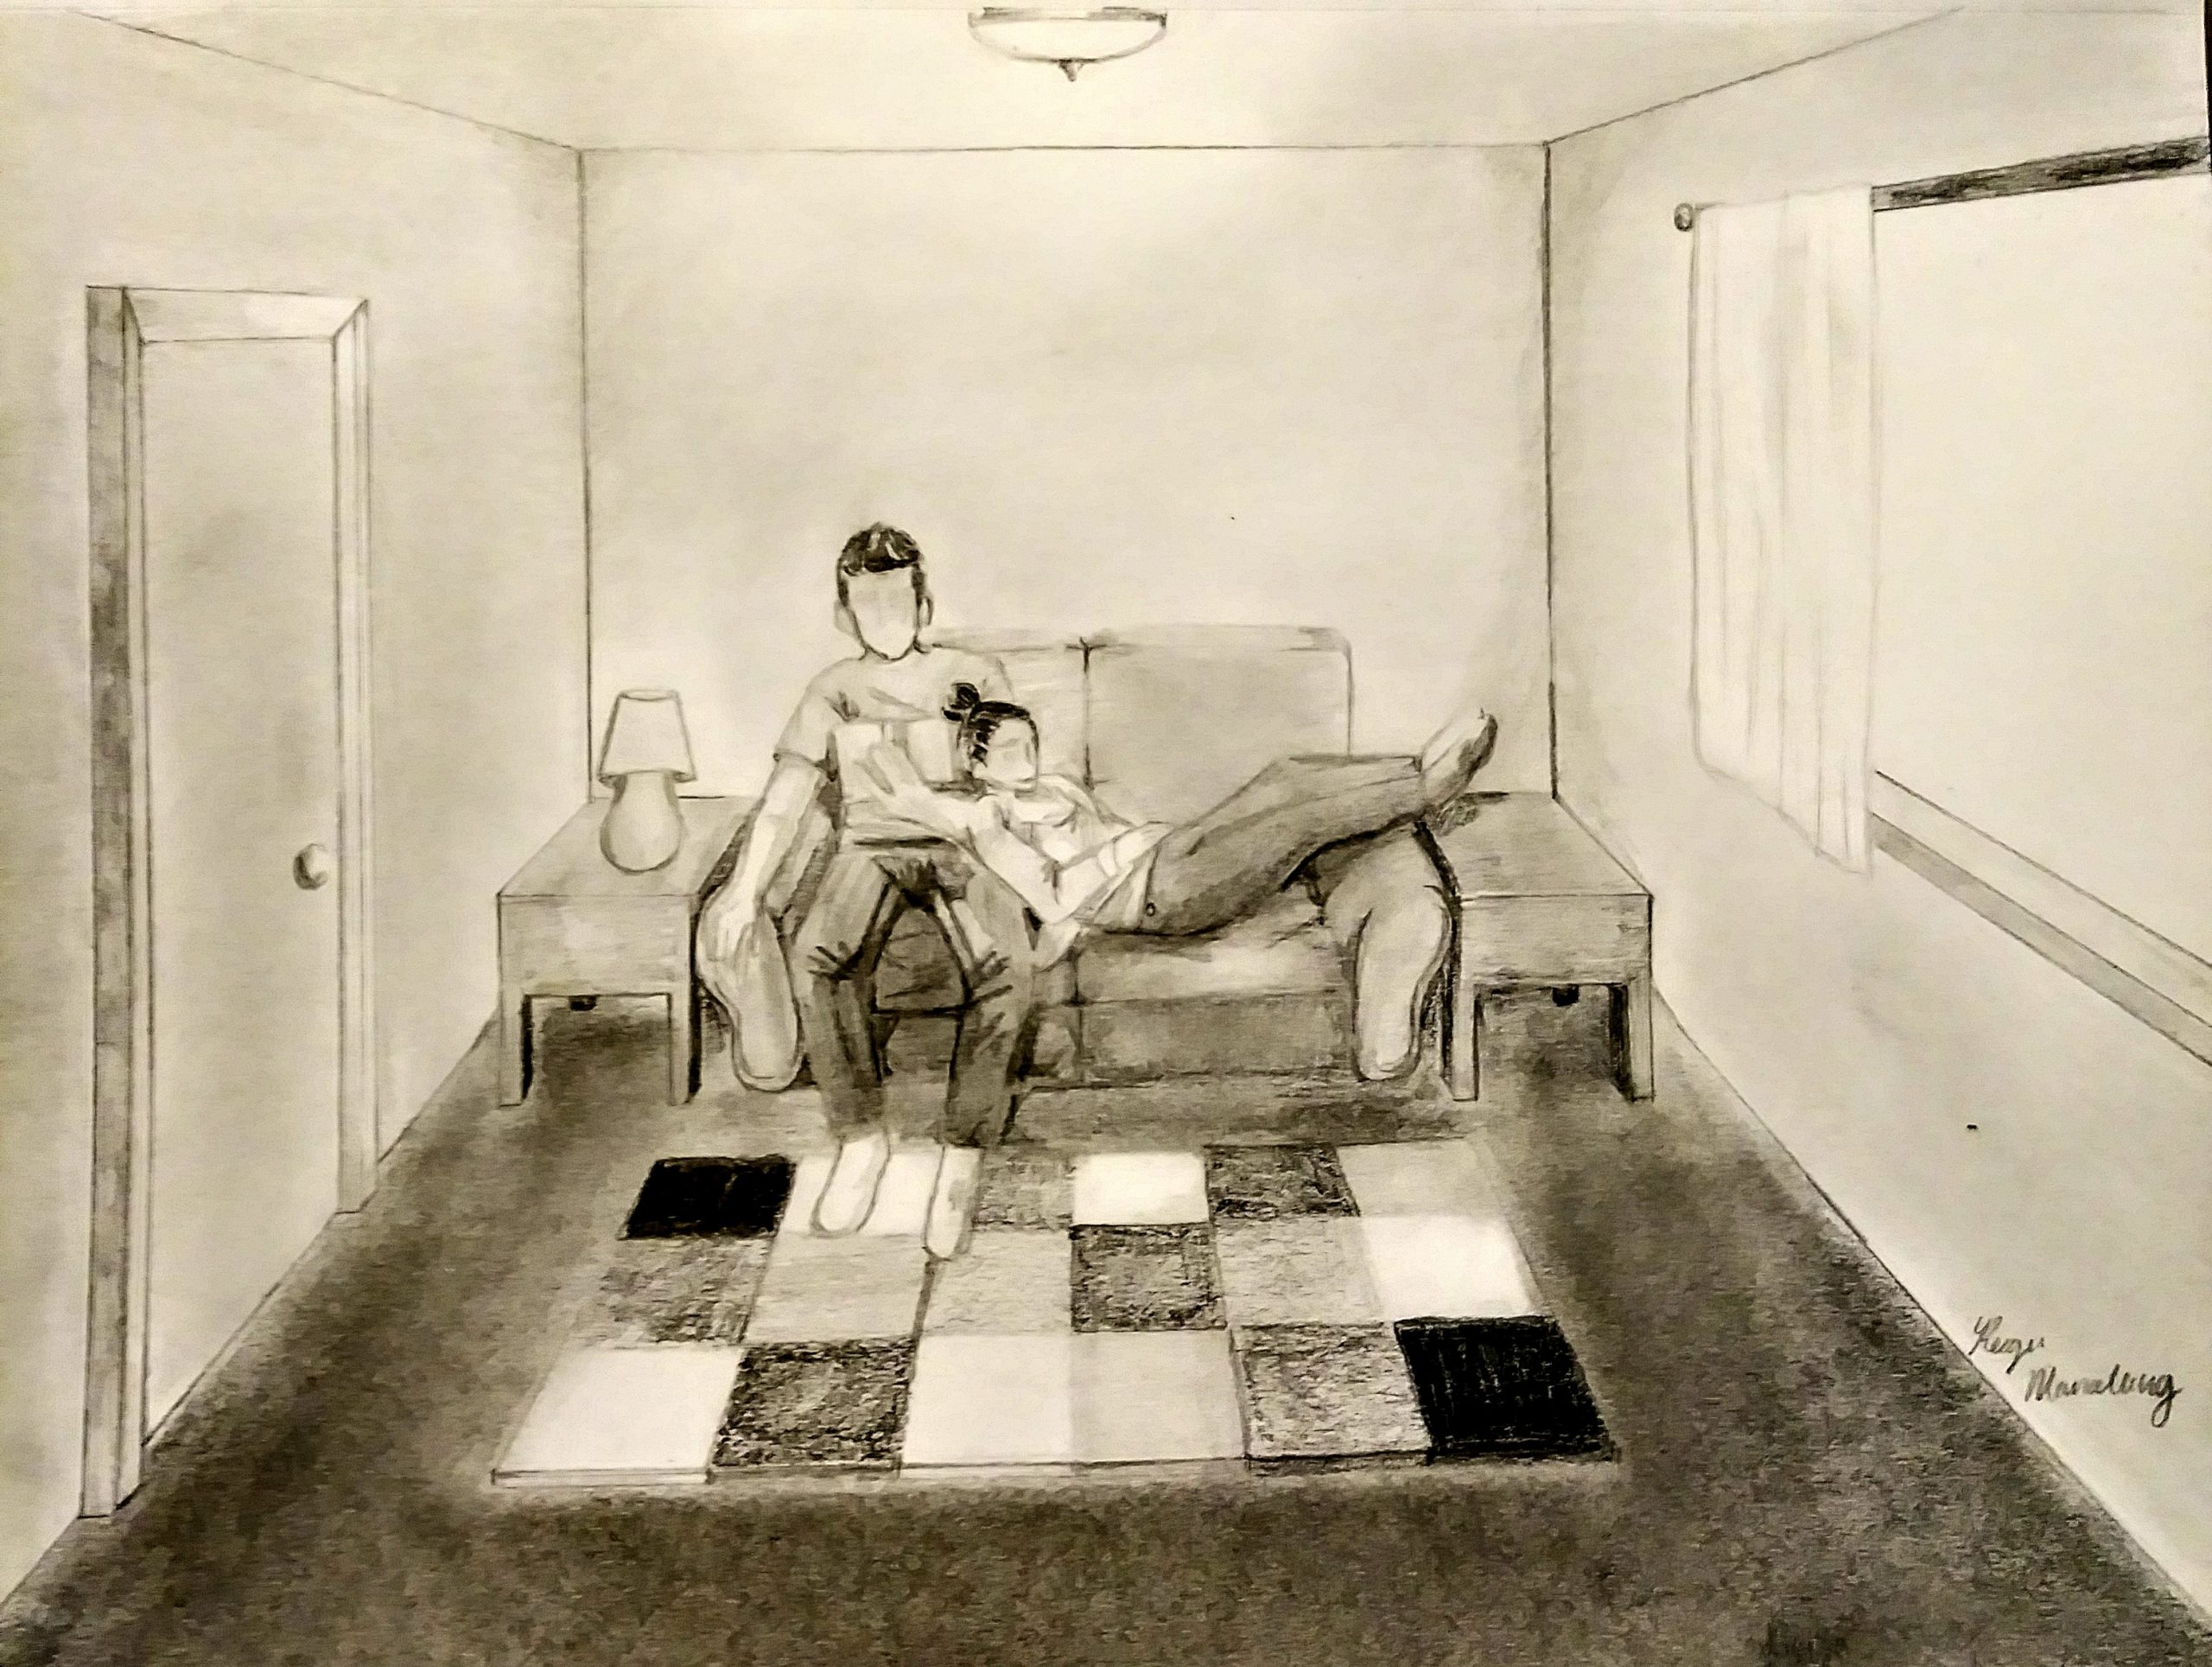 Drawing of two people relaxing on couch in room with patterned rug